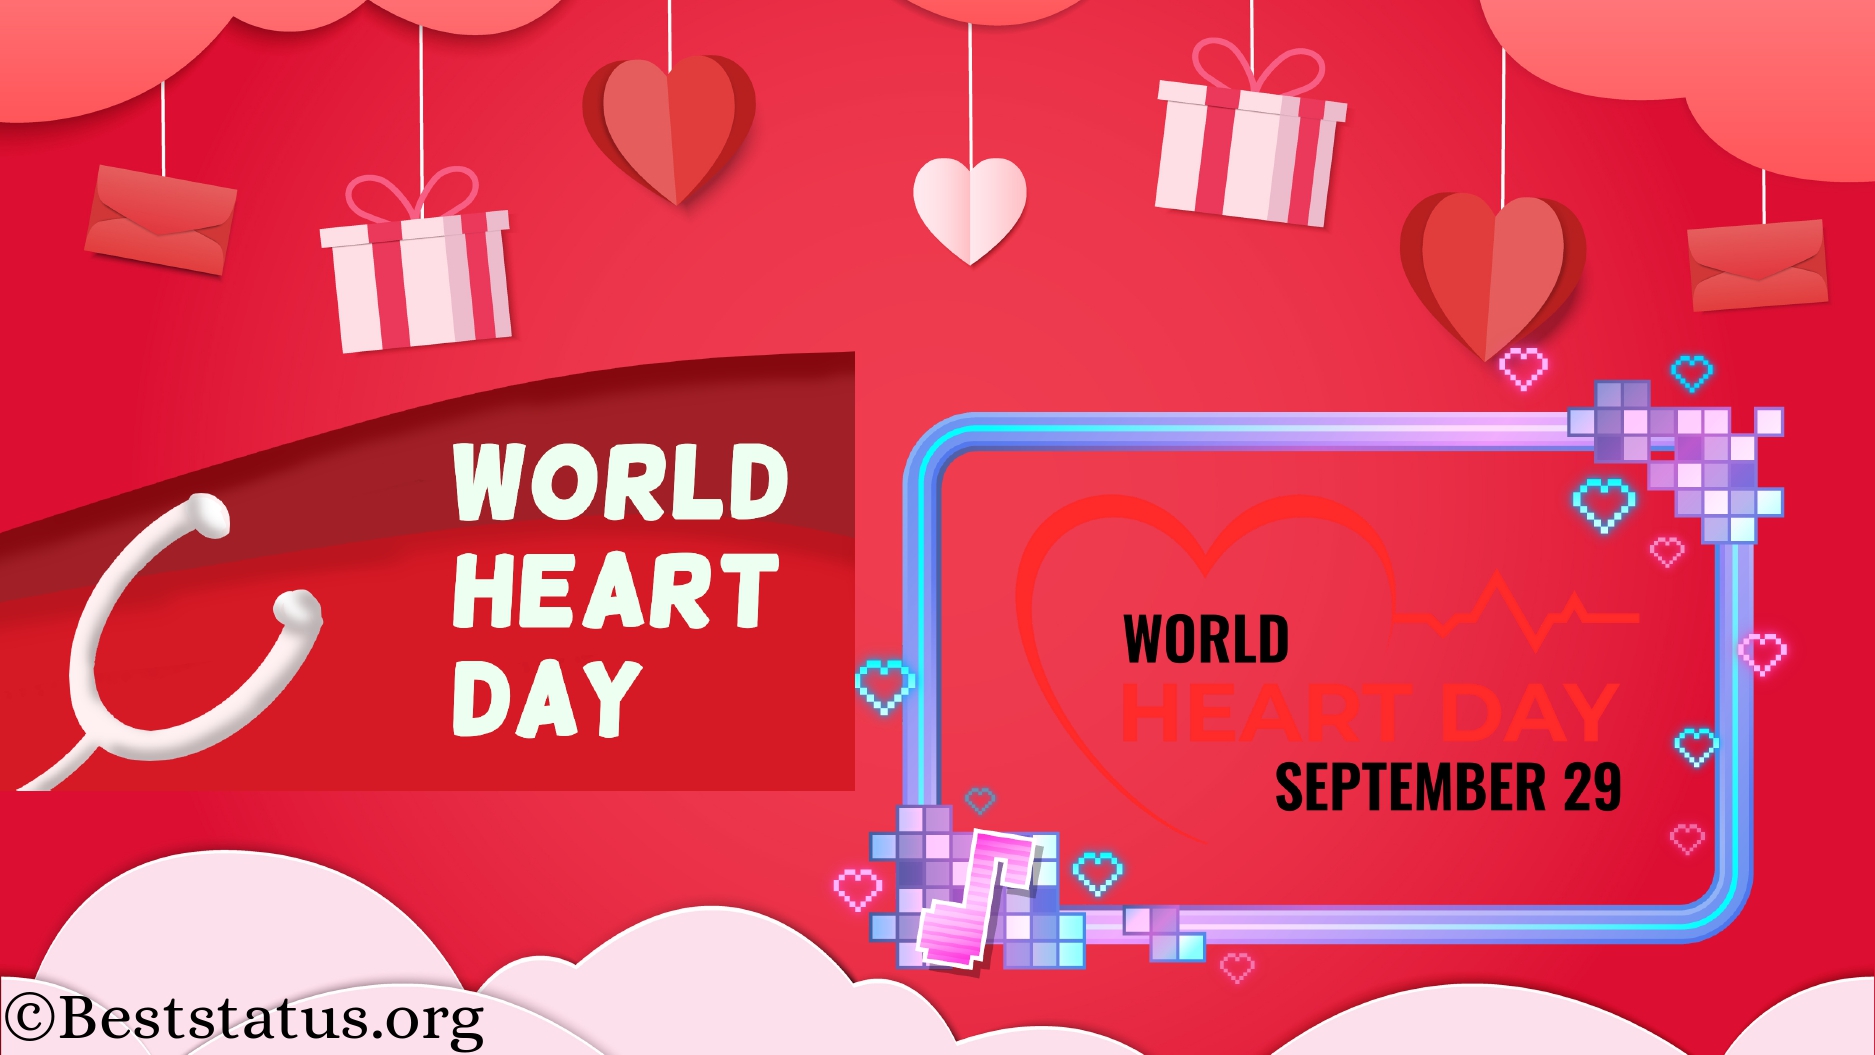 World Heart Day: 30+ Best Messages, Wishes, Quotes, And Slogans